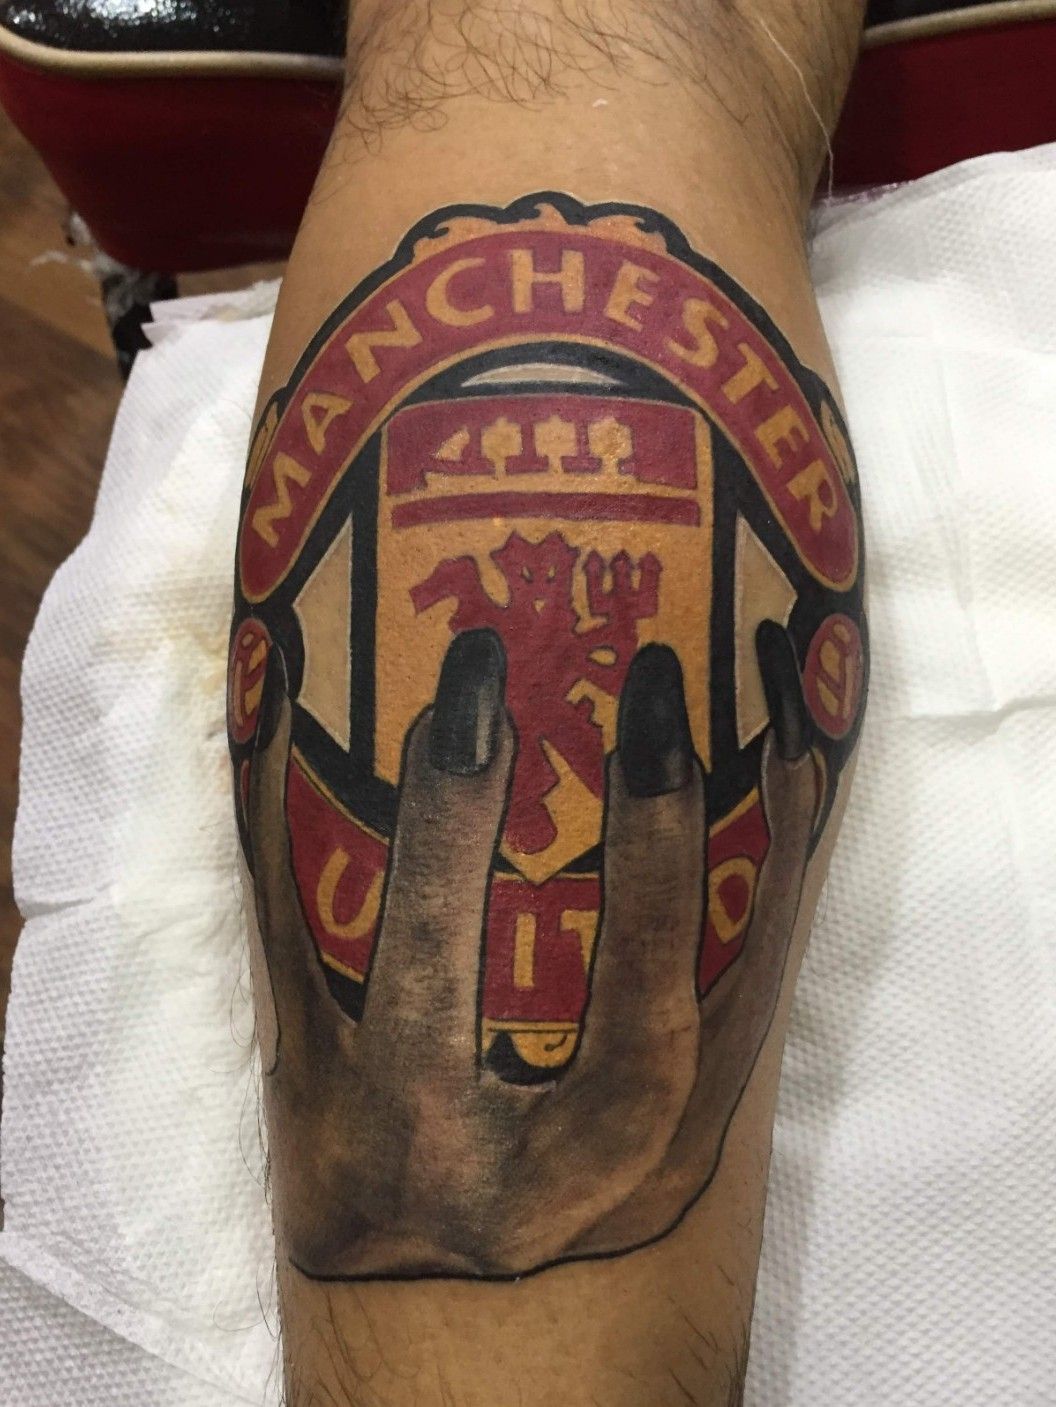 405 Manchester United Tattoo Stock Photos HighRes Pictures and Images   Getty Images